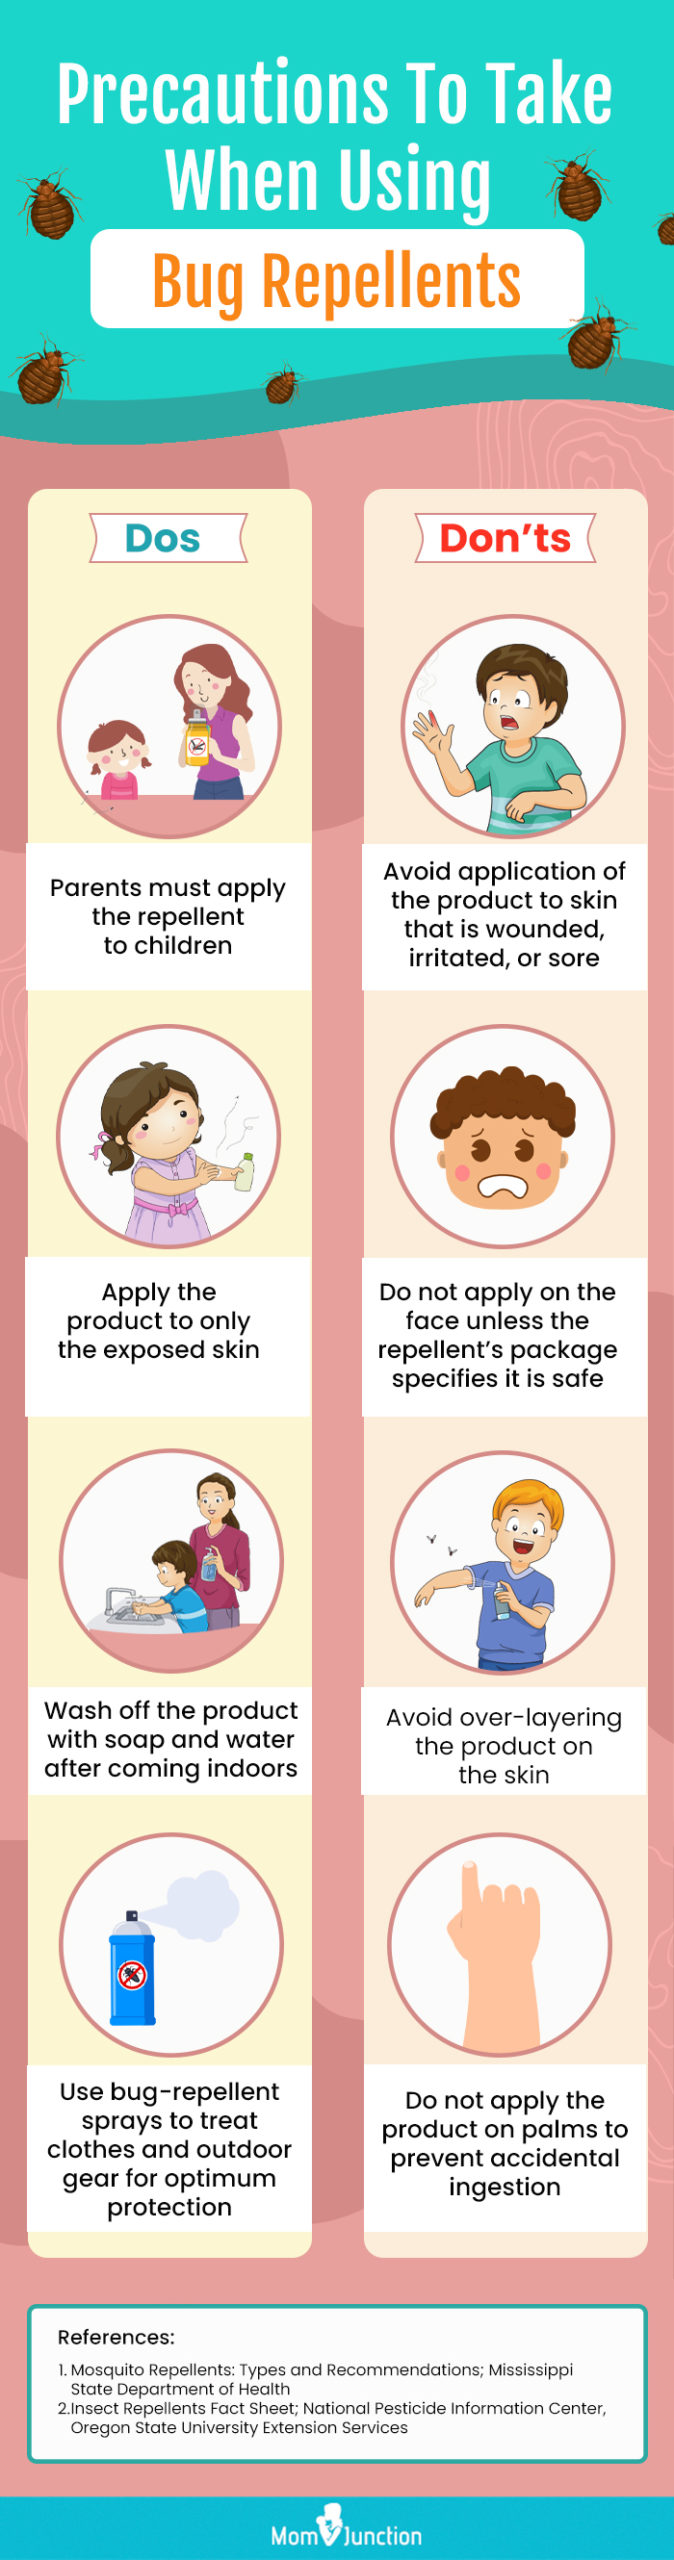 Precautions To Take When Using Bug Repellents (infographic)